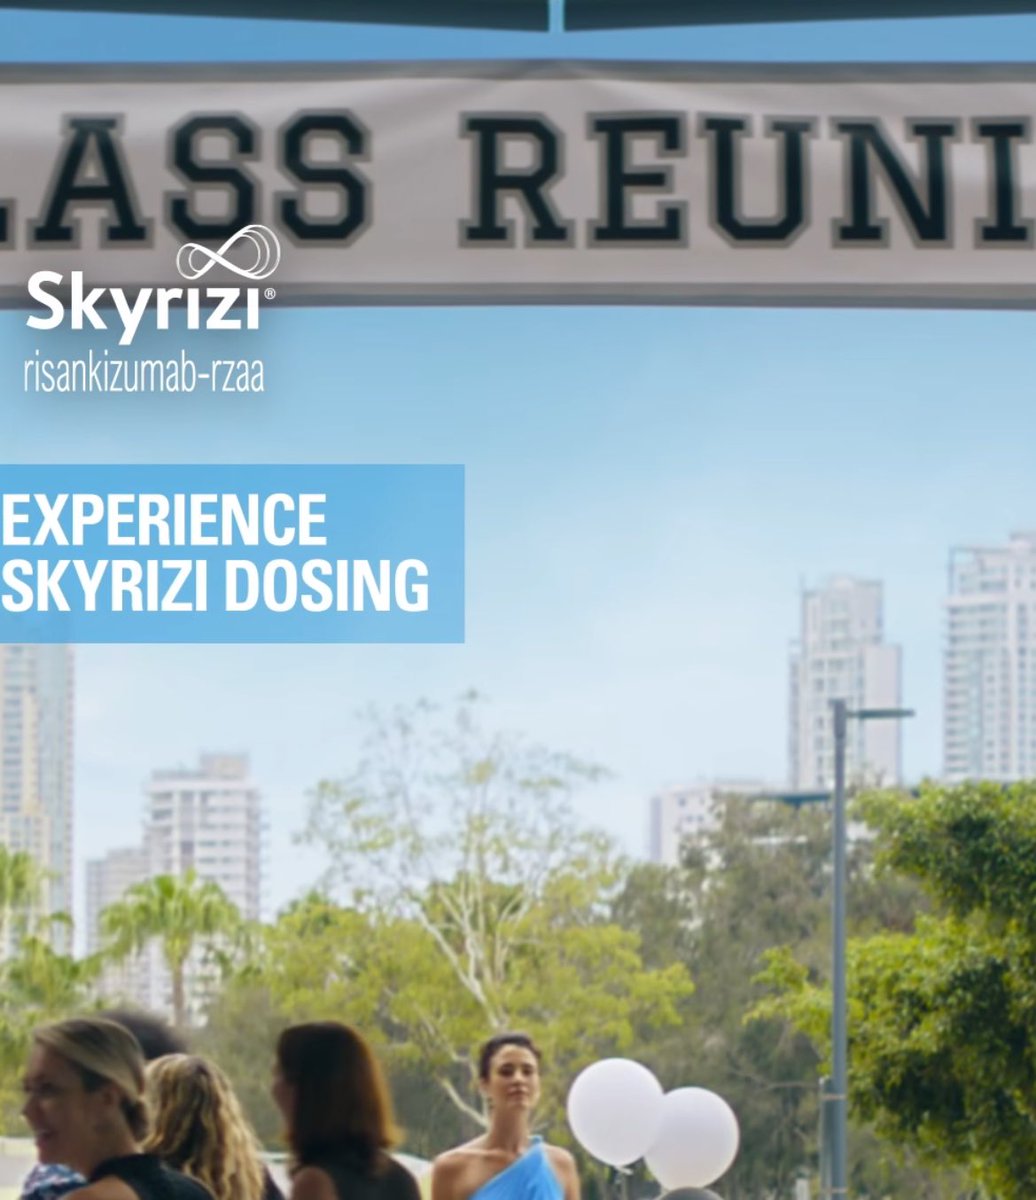 Skyrizi might be a great medicine, but the way they cut that banner in the ad isn’t the best.